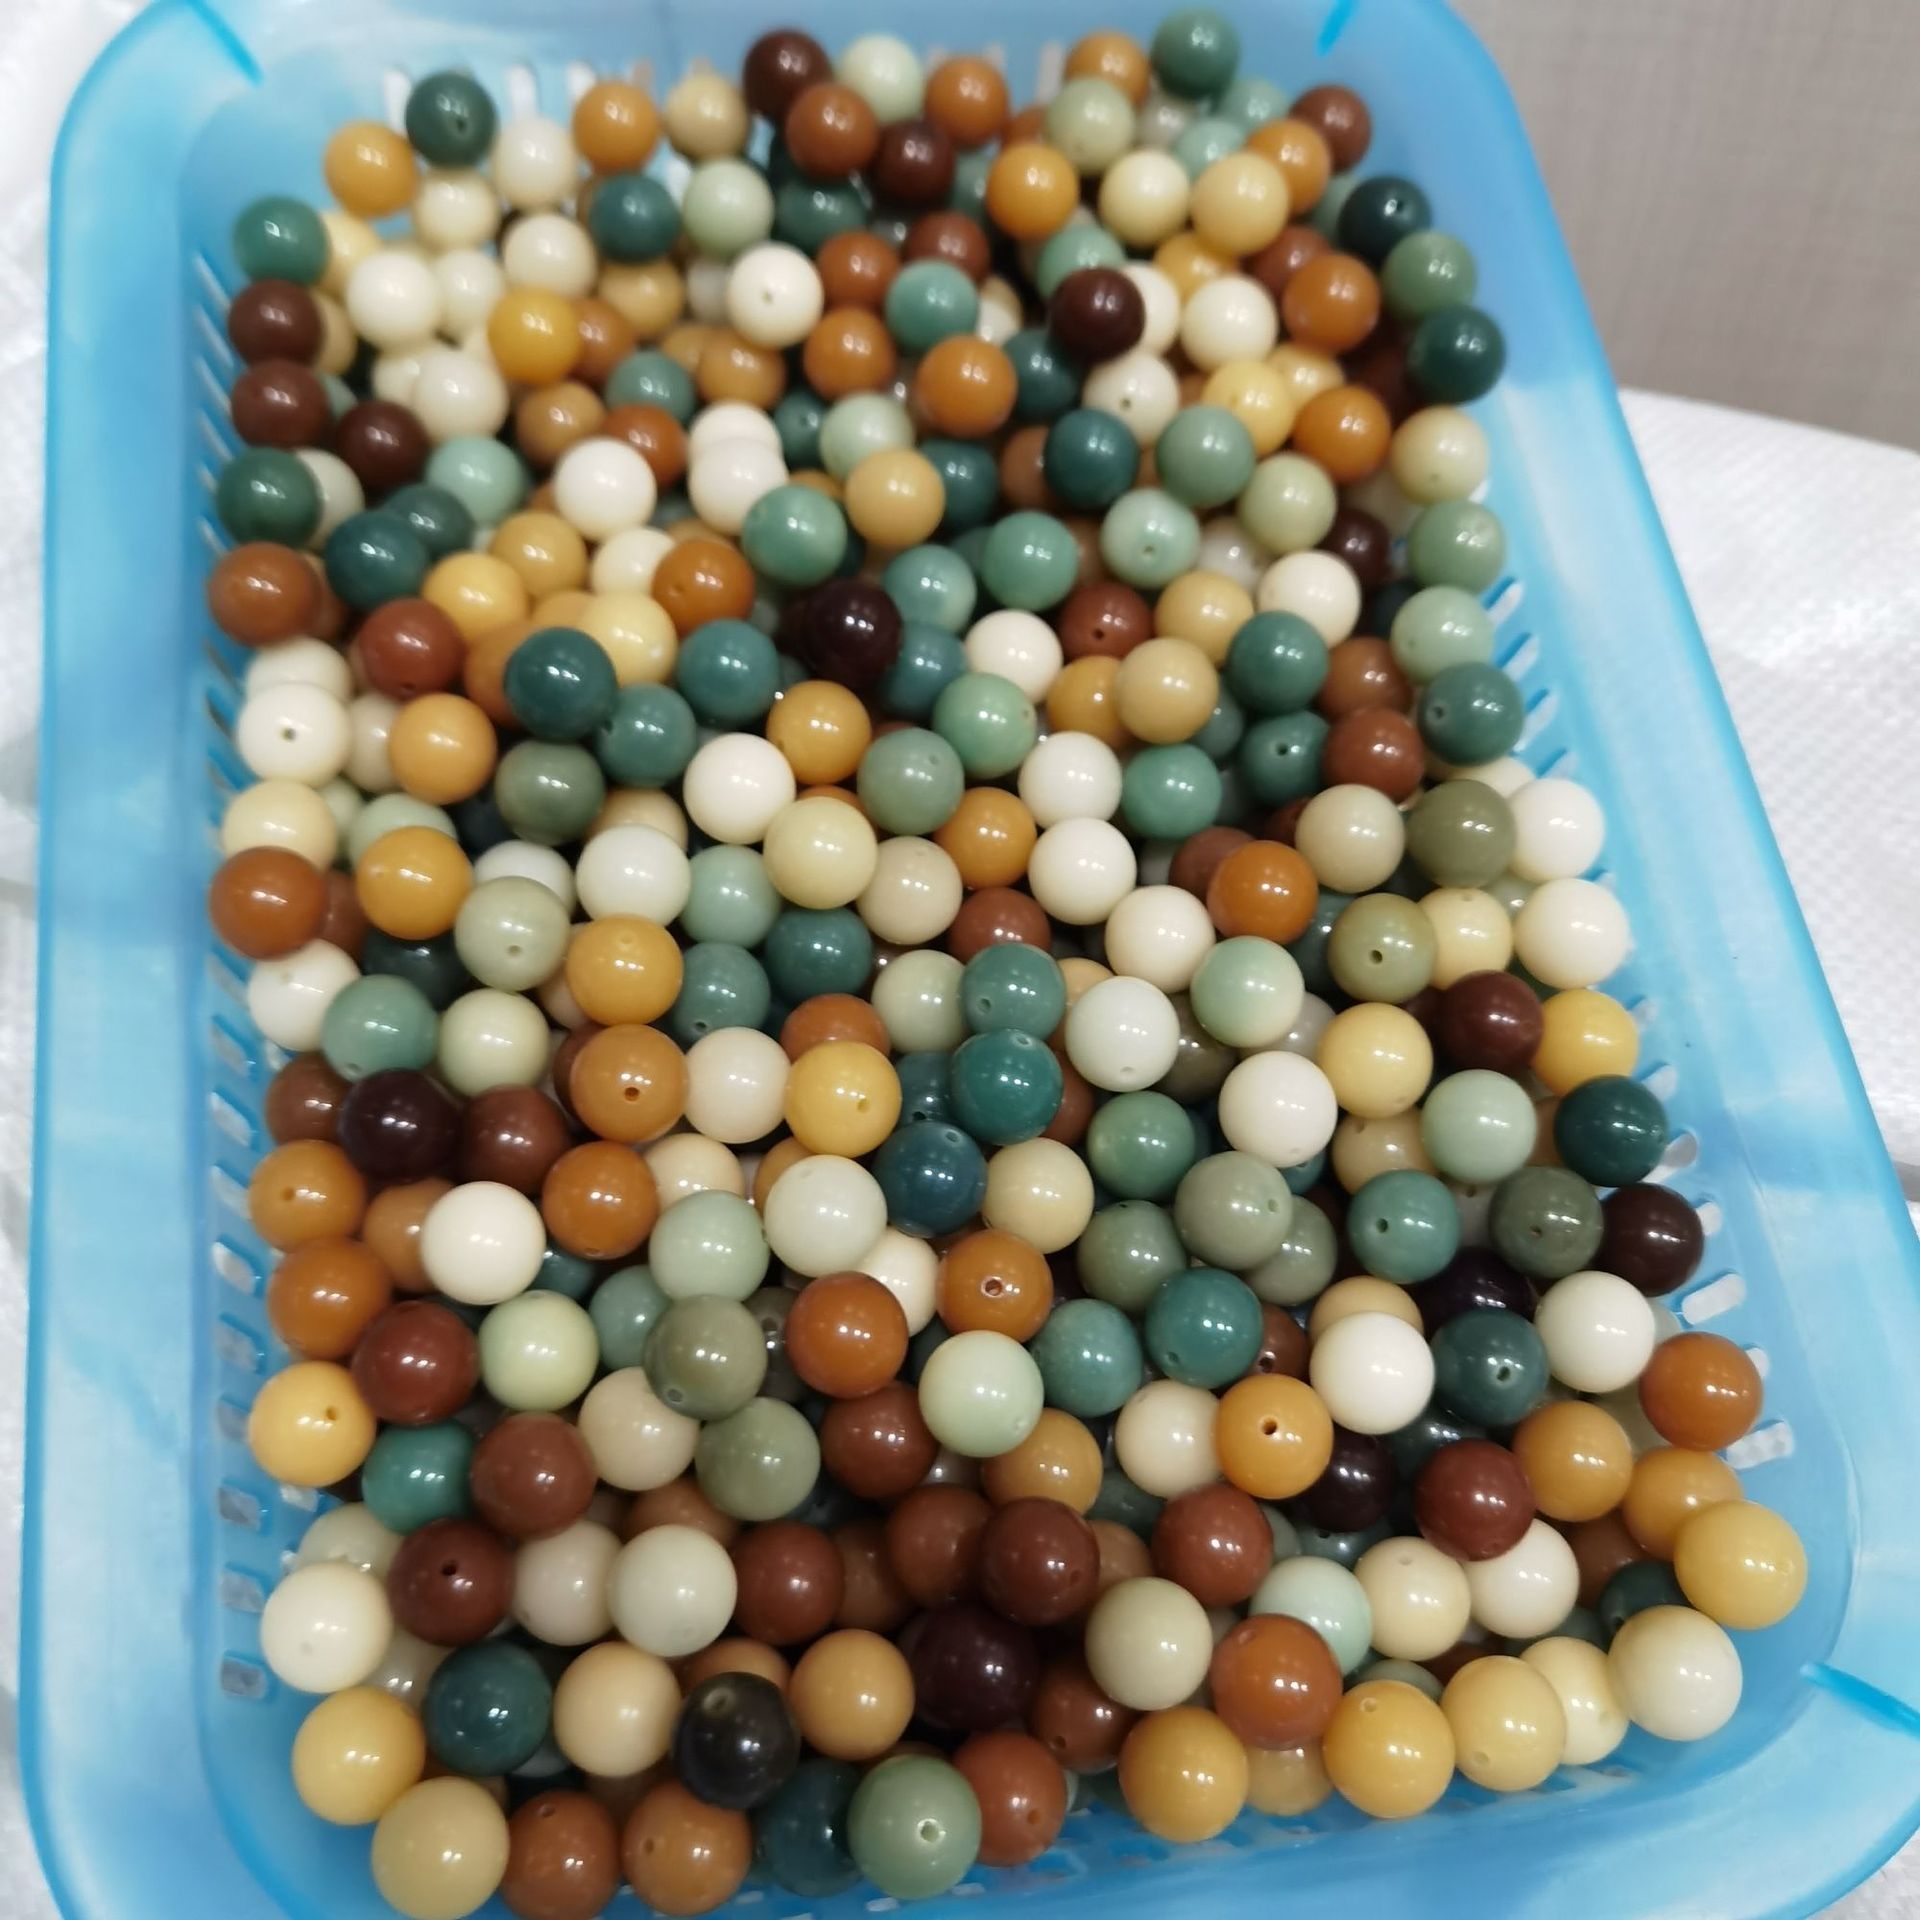 Natural Colorful Bodhi Root round Beads Weathered Bodhi Root Bodhi Root Scattered Beads Lv Guo Multi Jewels Bracelet Buddha Beads